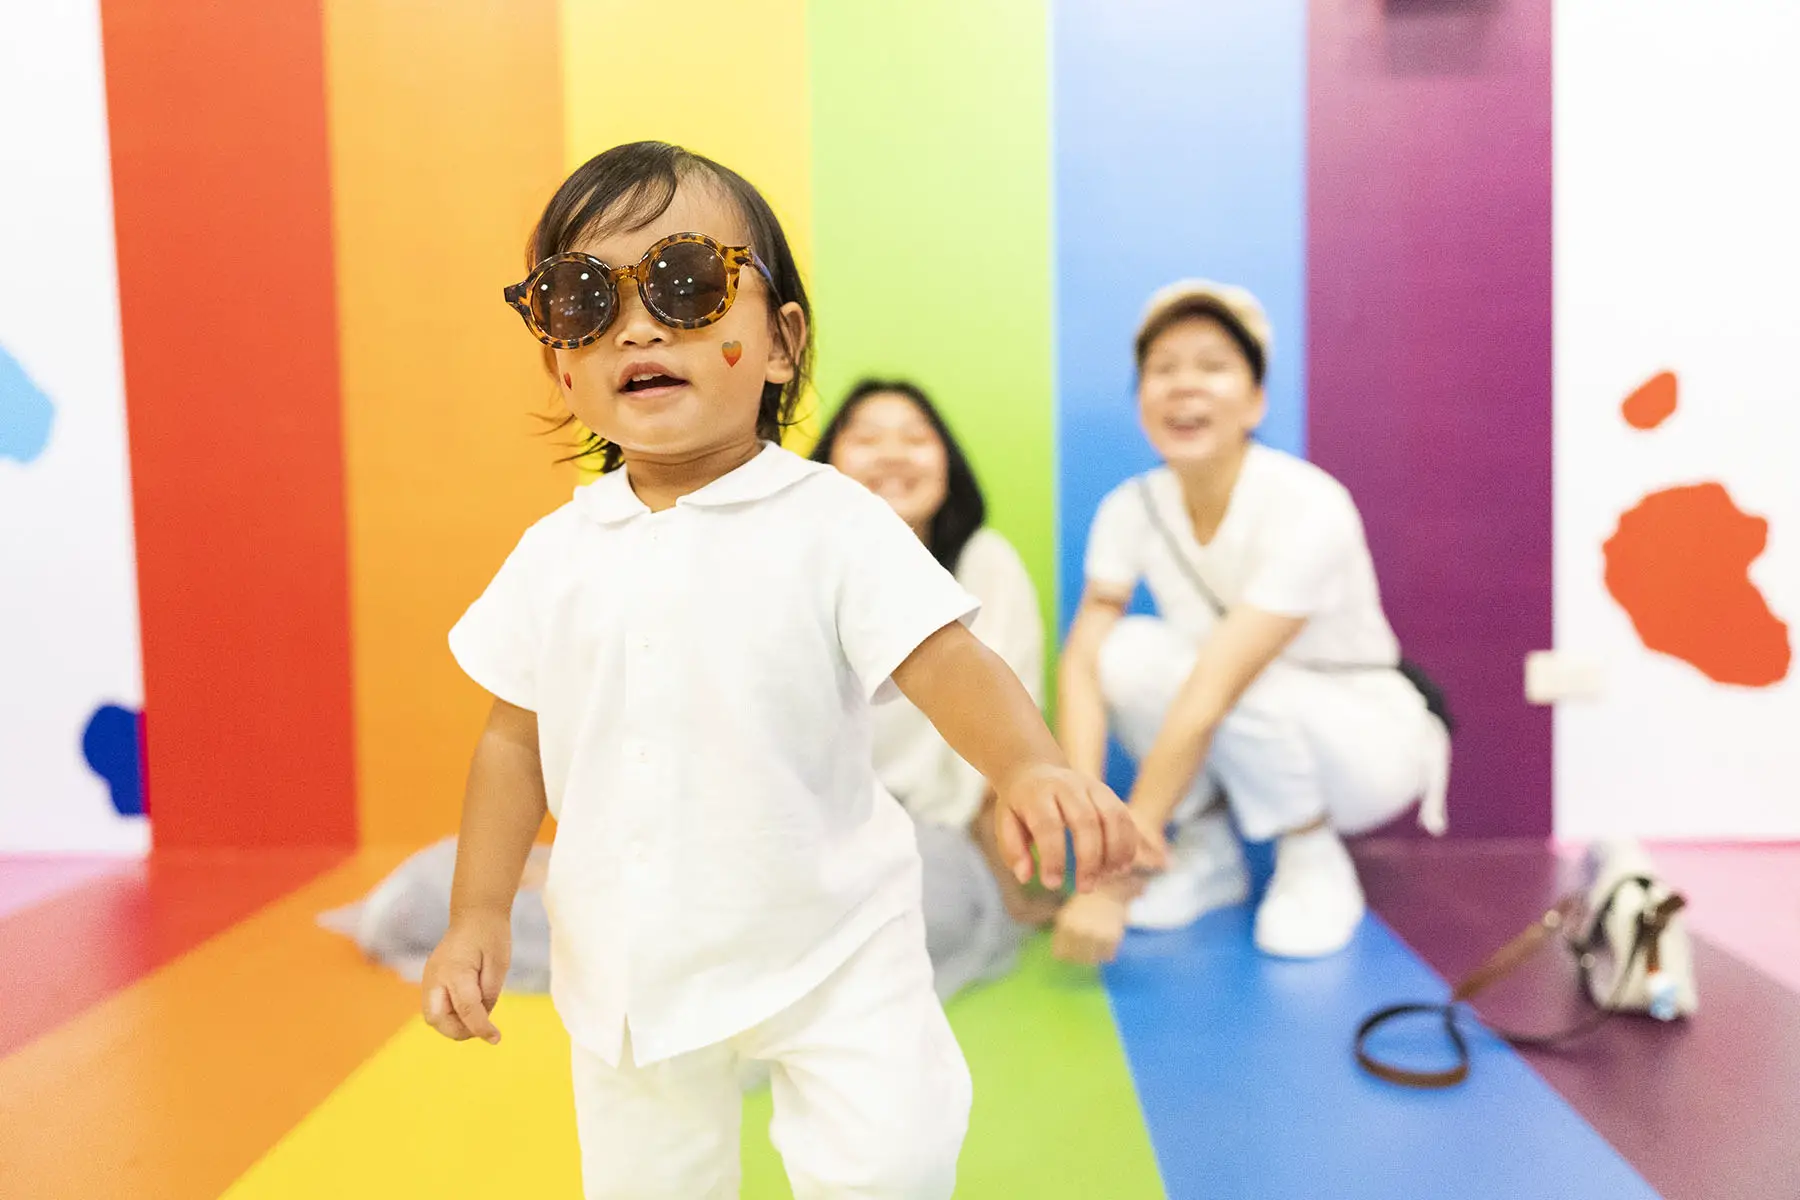 Cute baby is wearing sunglasses and walking towards the camera, their LGBT+ parents are smiling in the background in front of a rainbow flag.